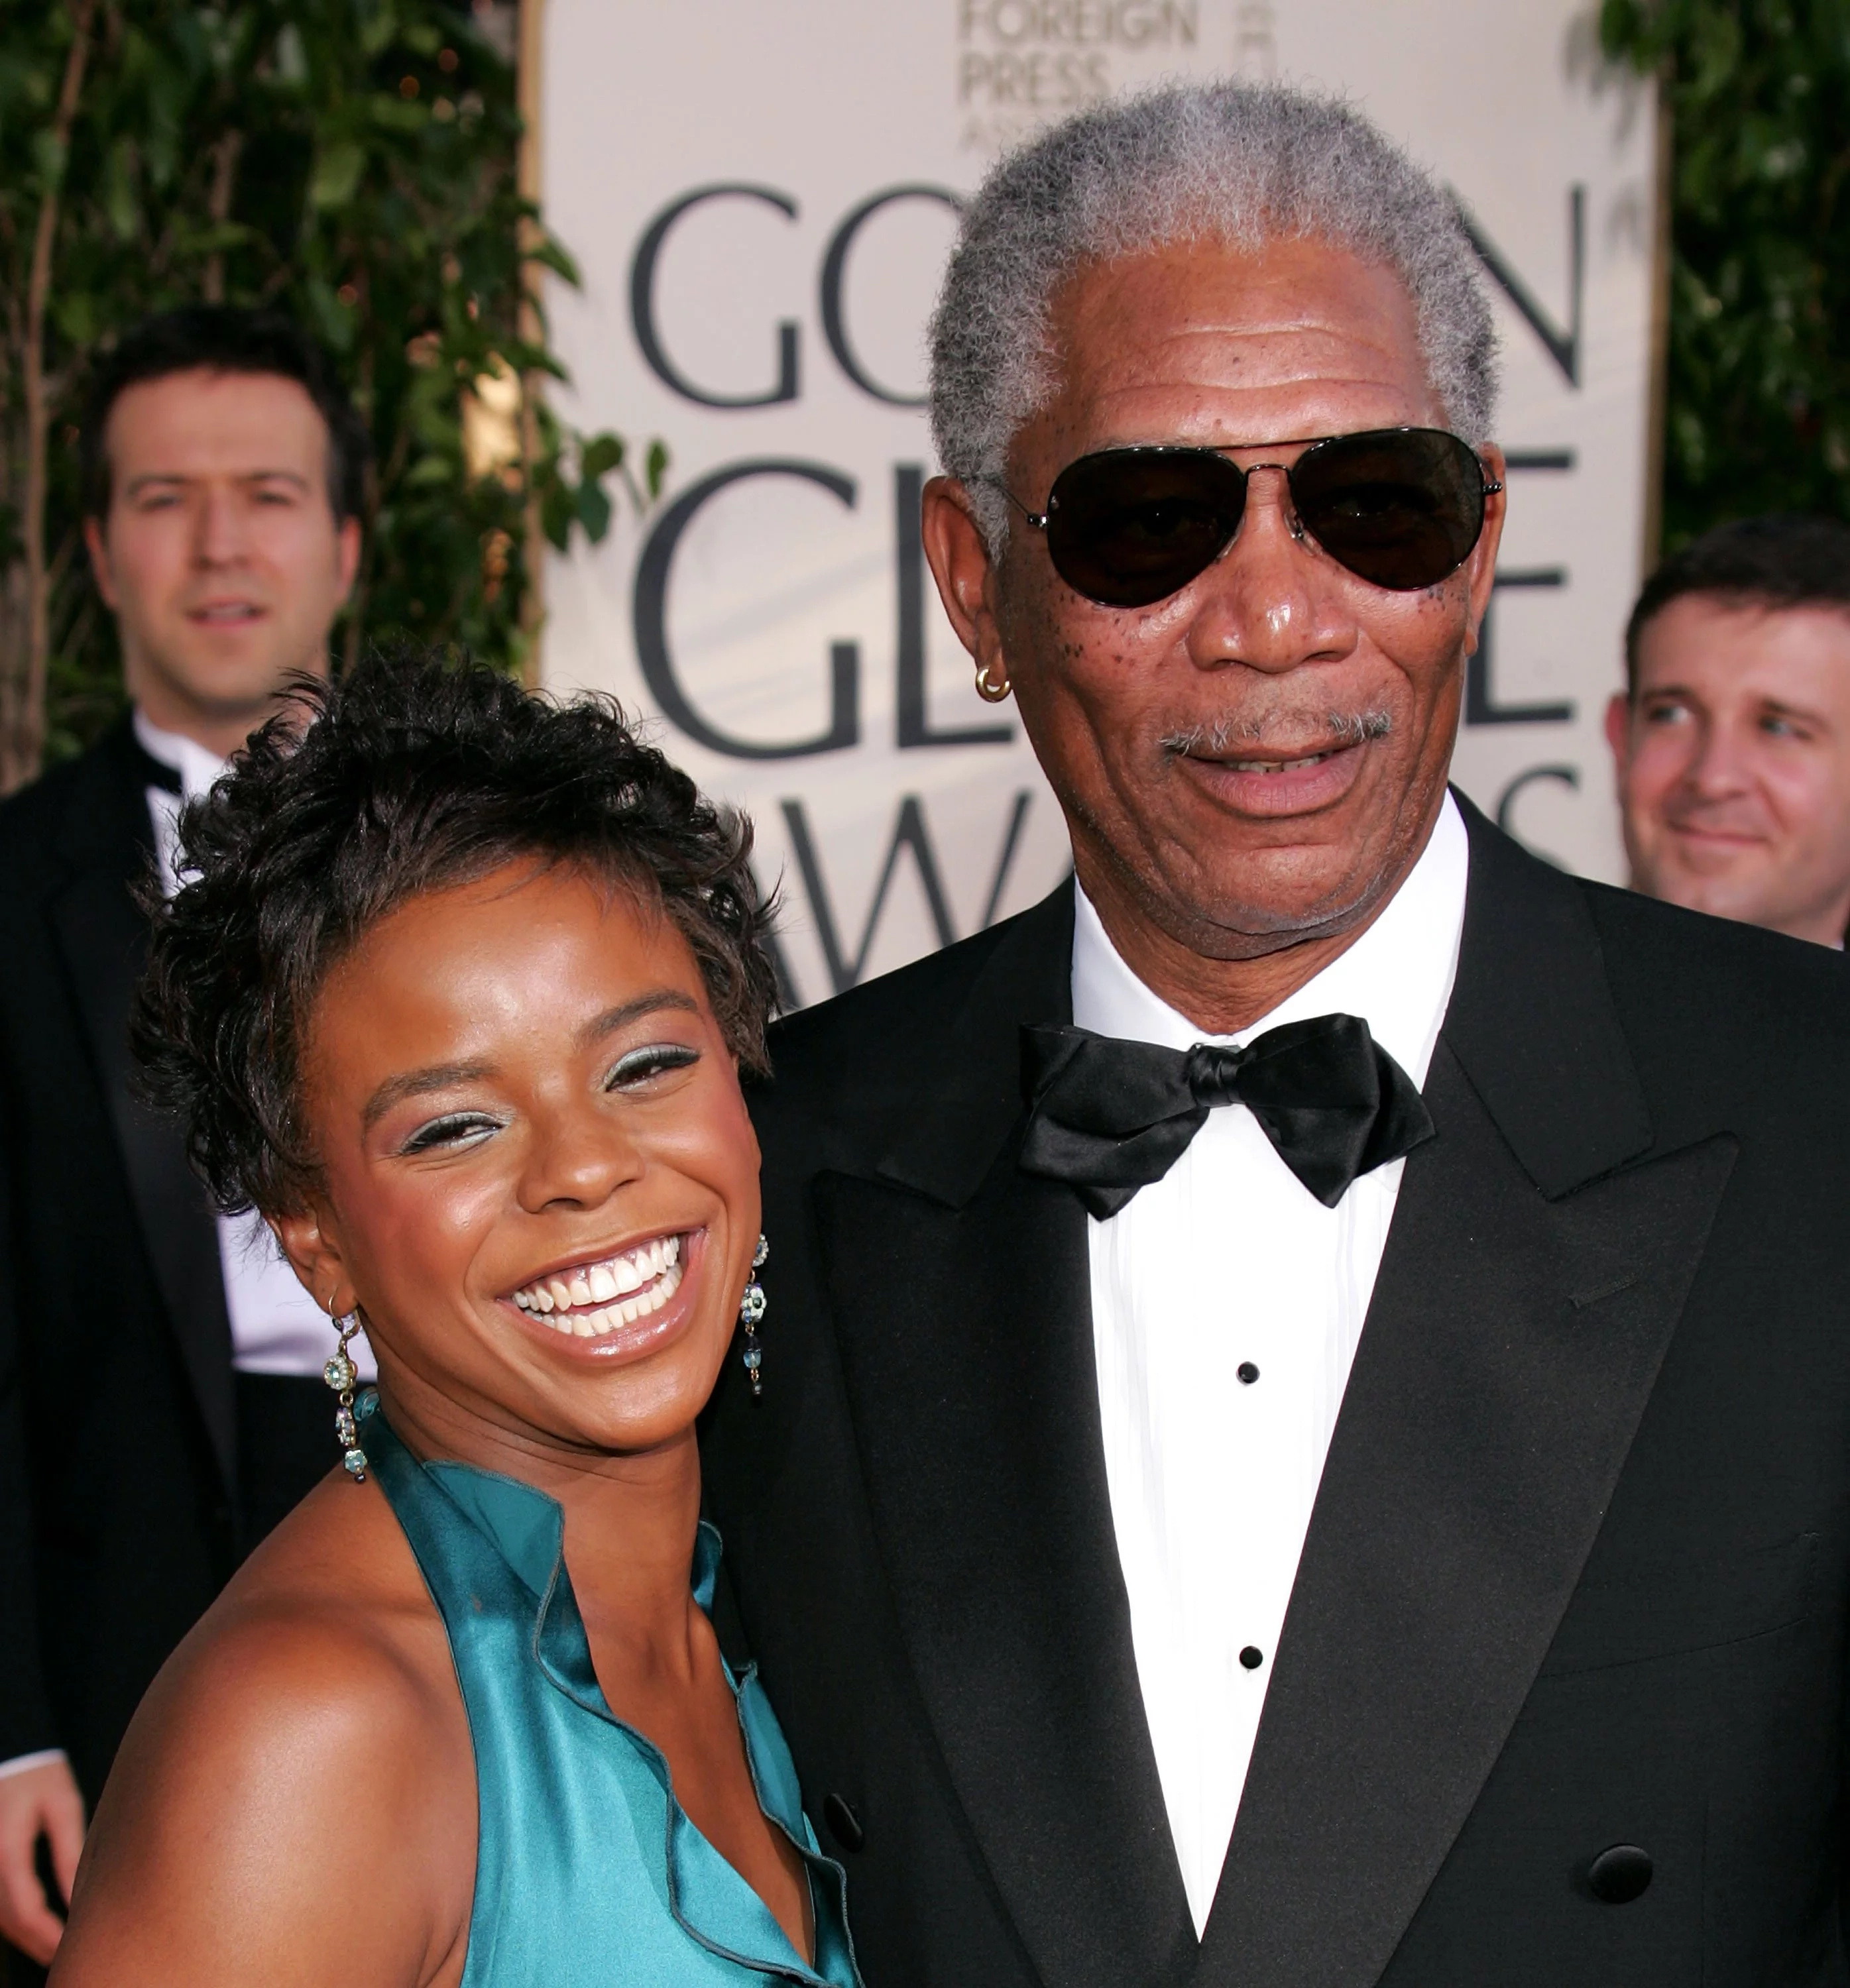 Morgan Freeman allegedly had a secret affair with his grandchild before her brutal death